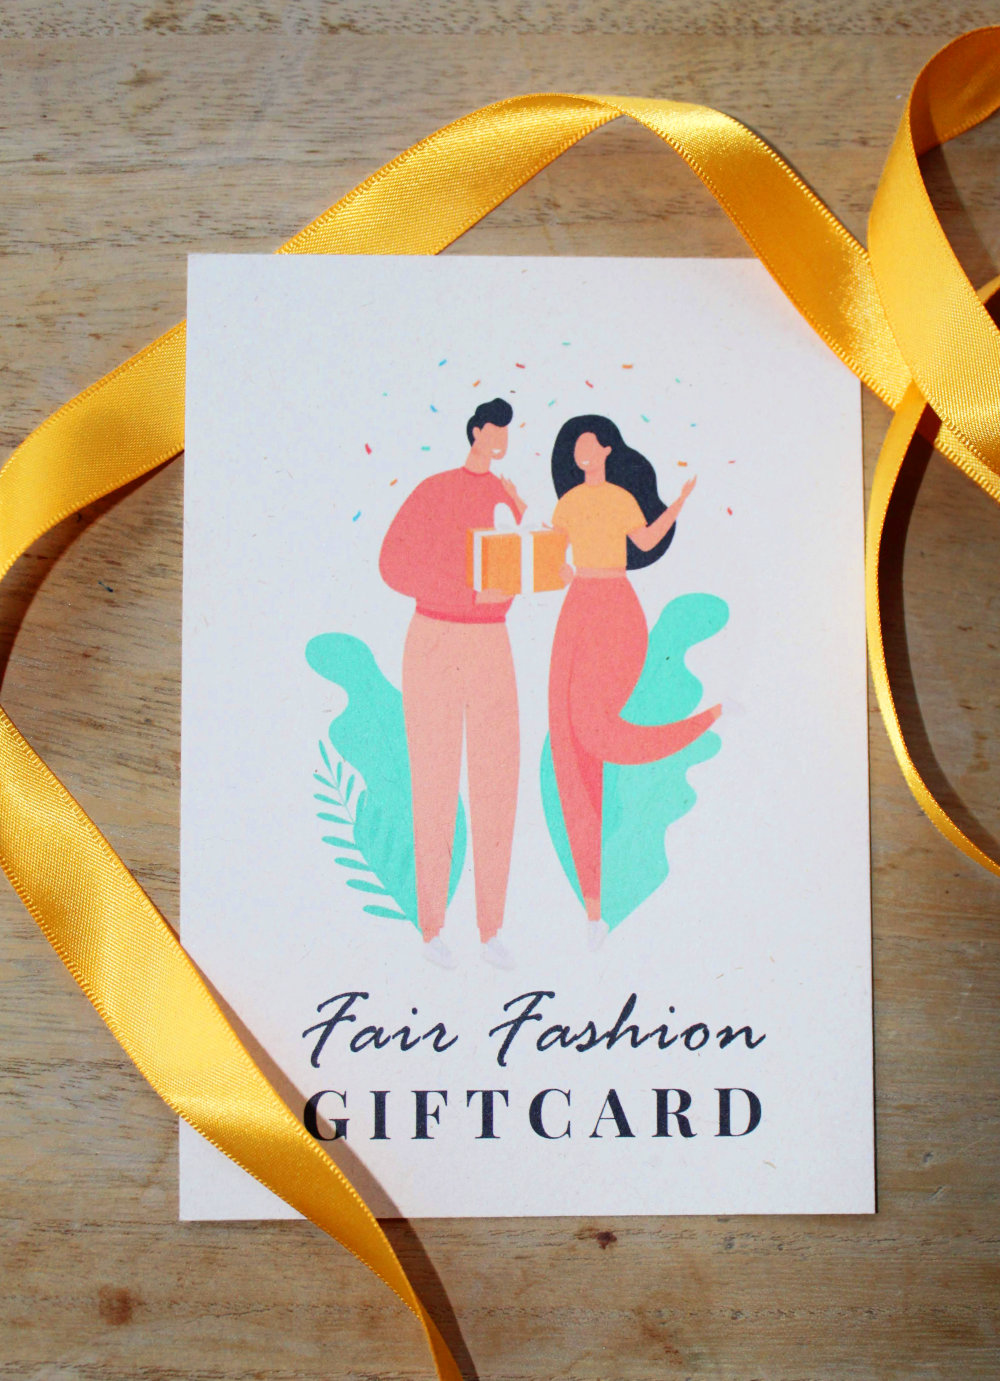 Fair Fashion Giftcard from Project Cece